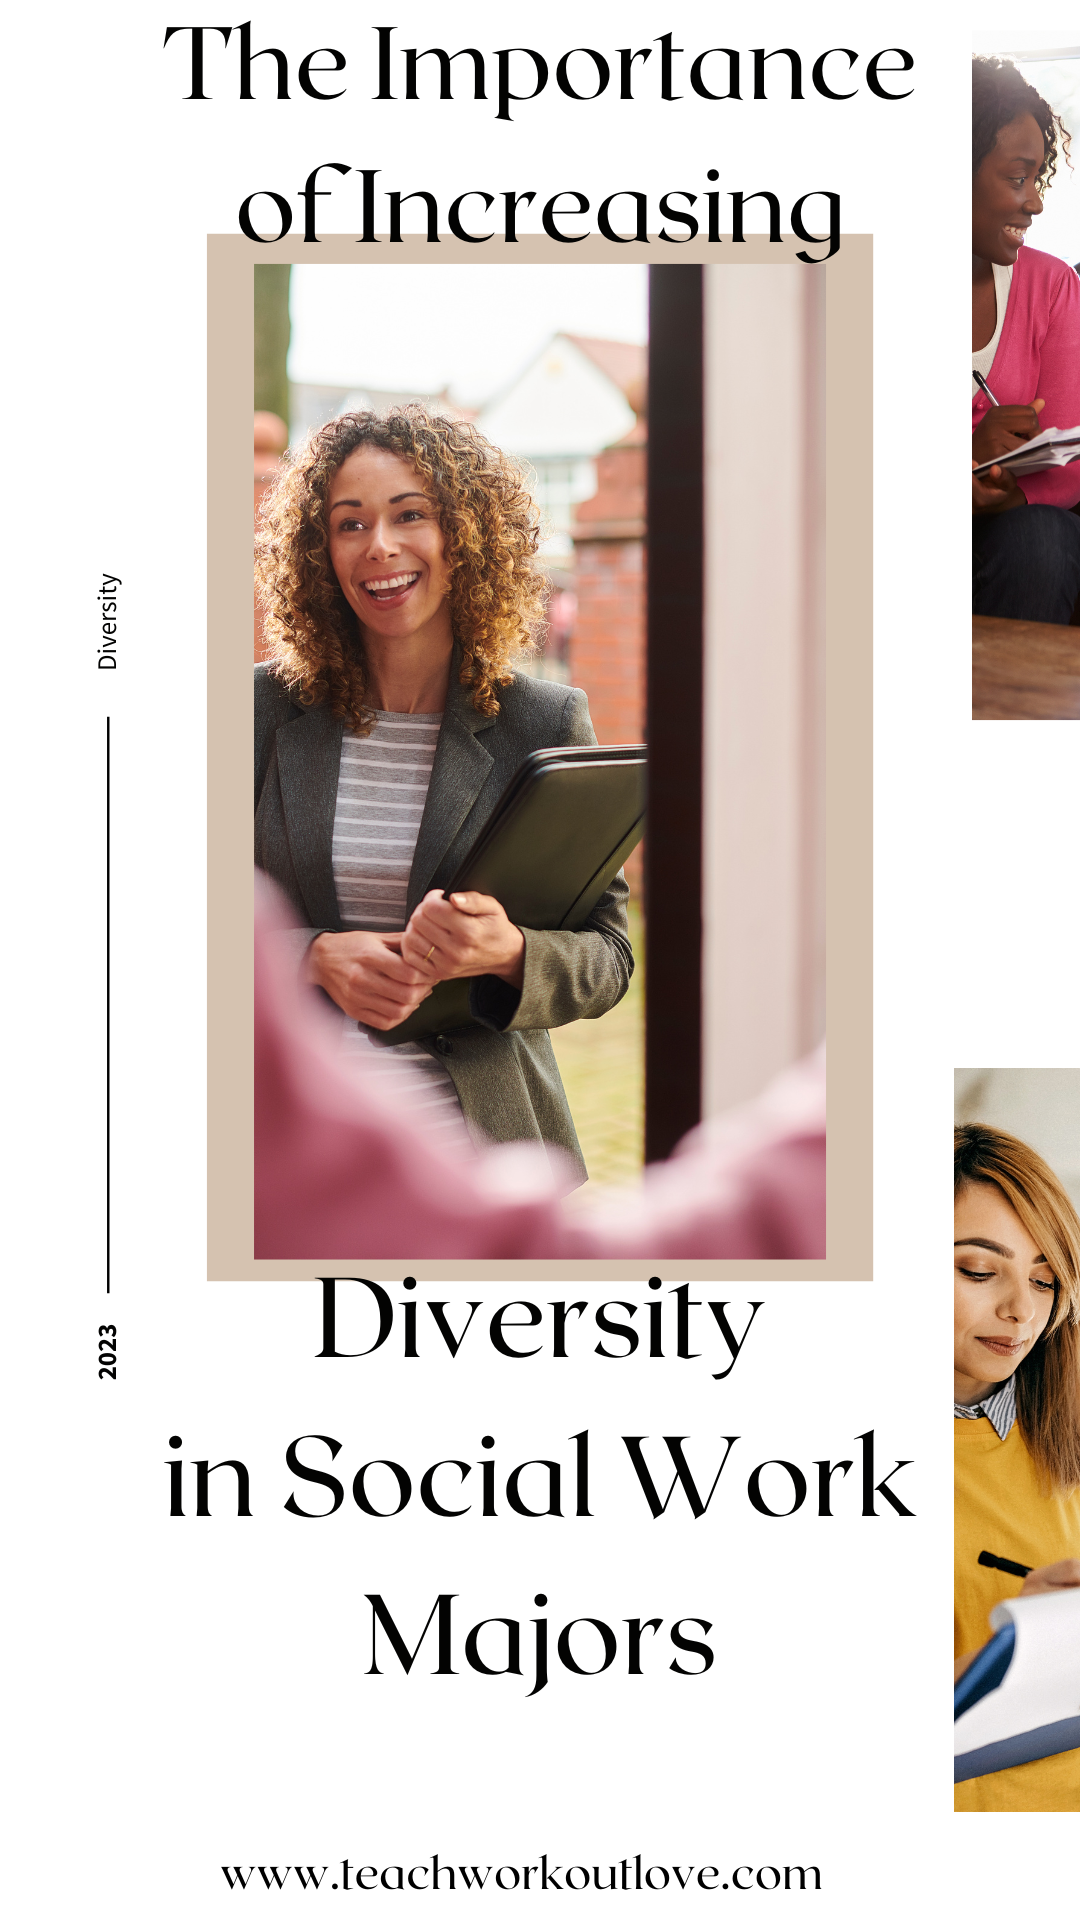 Social work is a key career industry. Here's the importance of increasing diversity in social work majors & how this can empower communities.